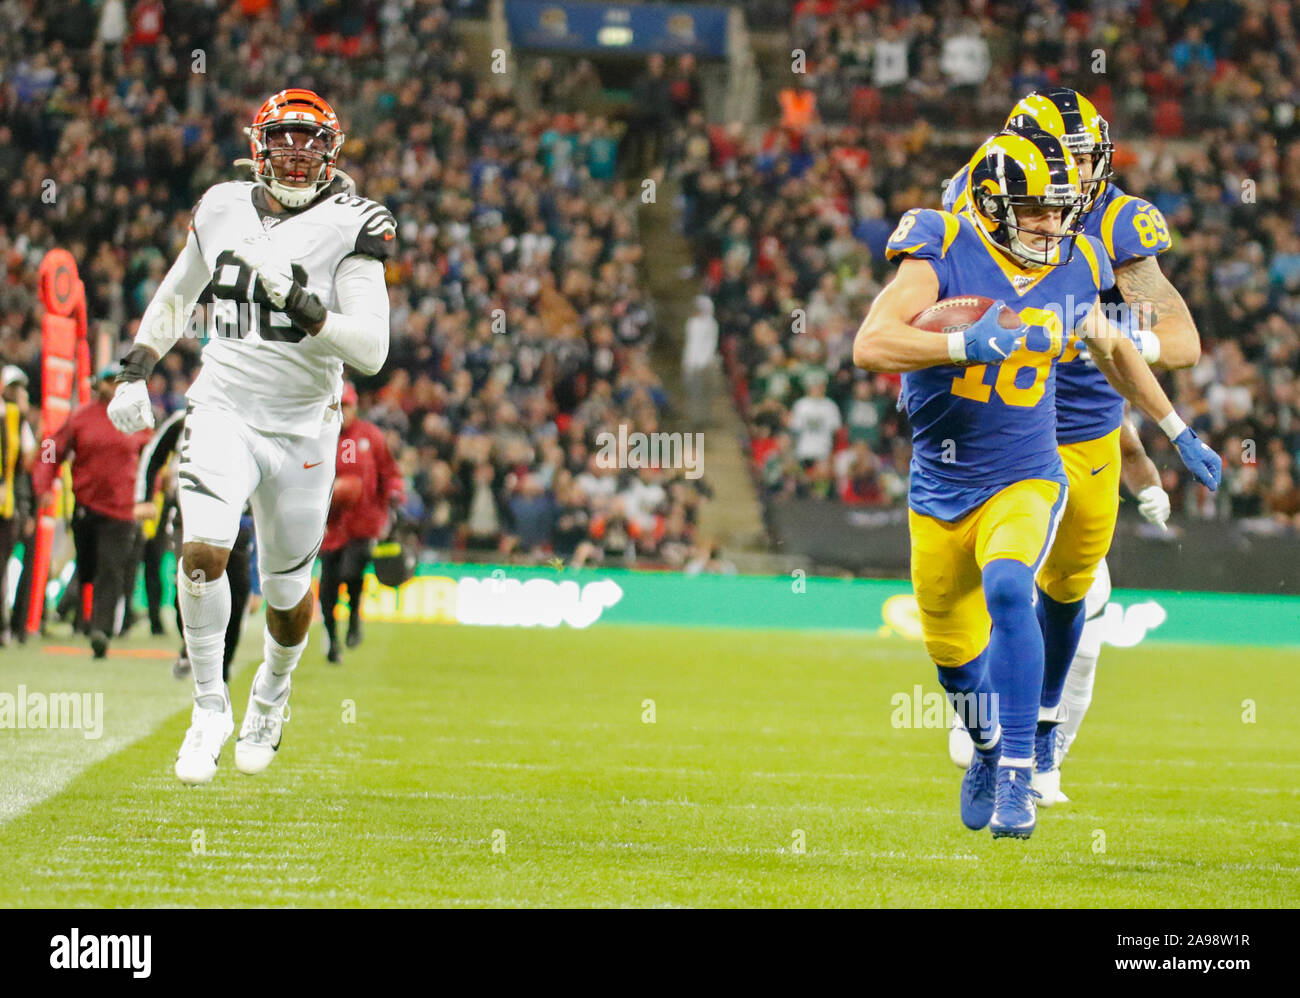 October 27 2019  London UK  Touchdown During the NFL game between the Cincinnati Bengals and the Los Angeles Rams on October 27, 2019 at Wembley Stadium, London, England. Stock Photo